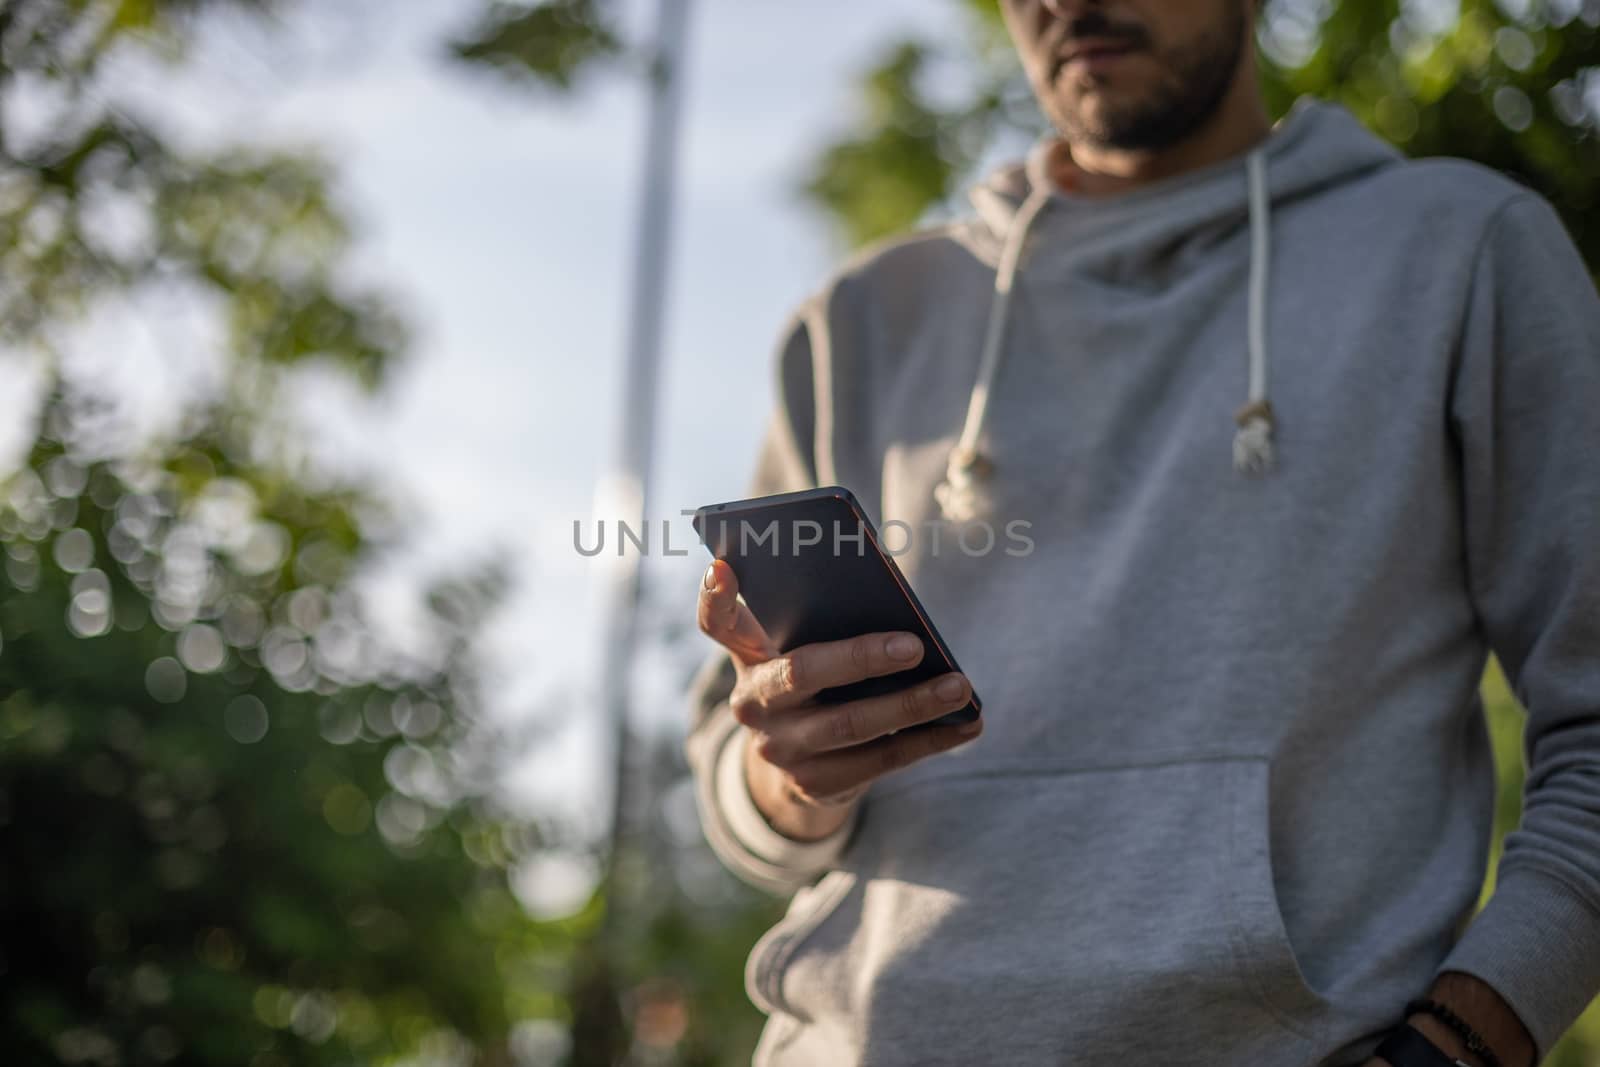 Man texting message on smartphone, outdoor park shoot, back light